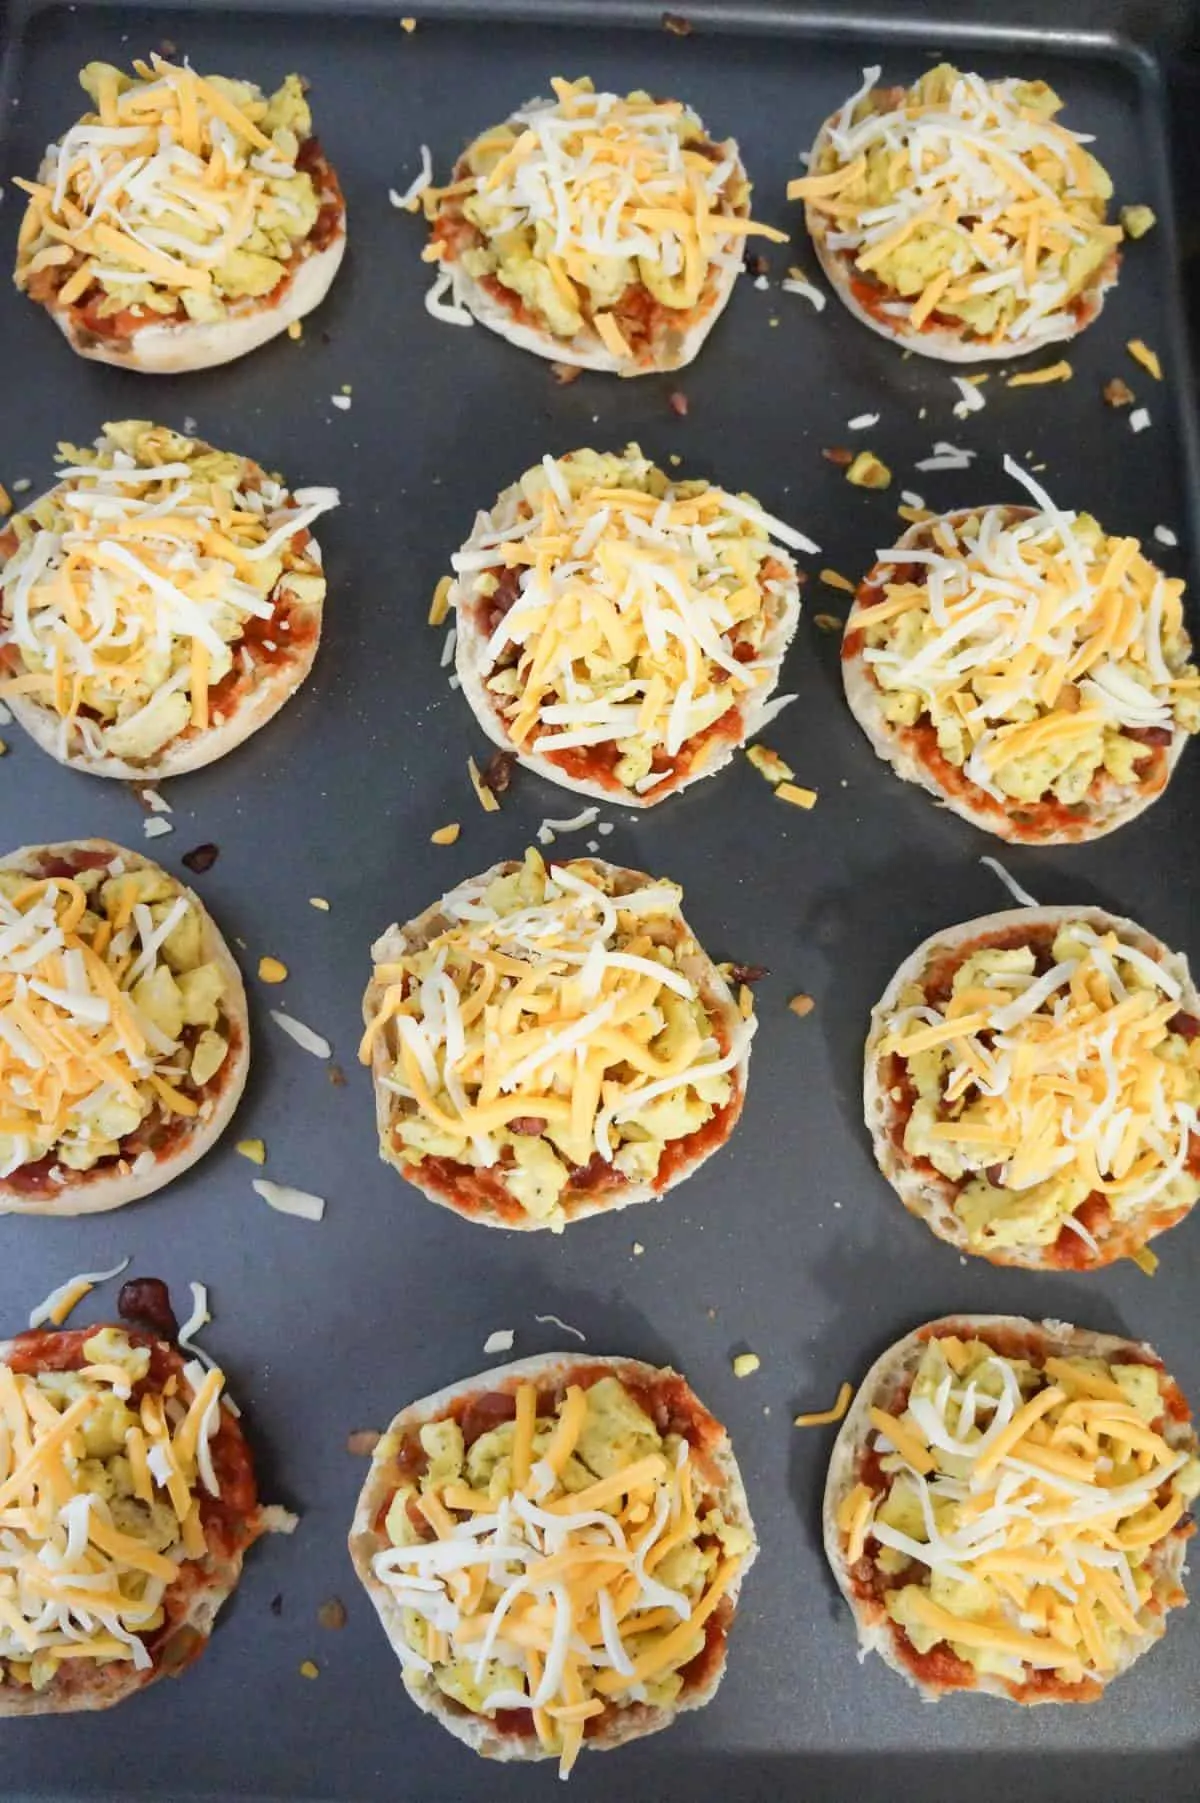 shredded cheese on top of breakfast pizzas before cooking